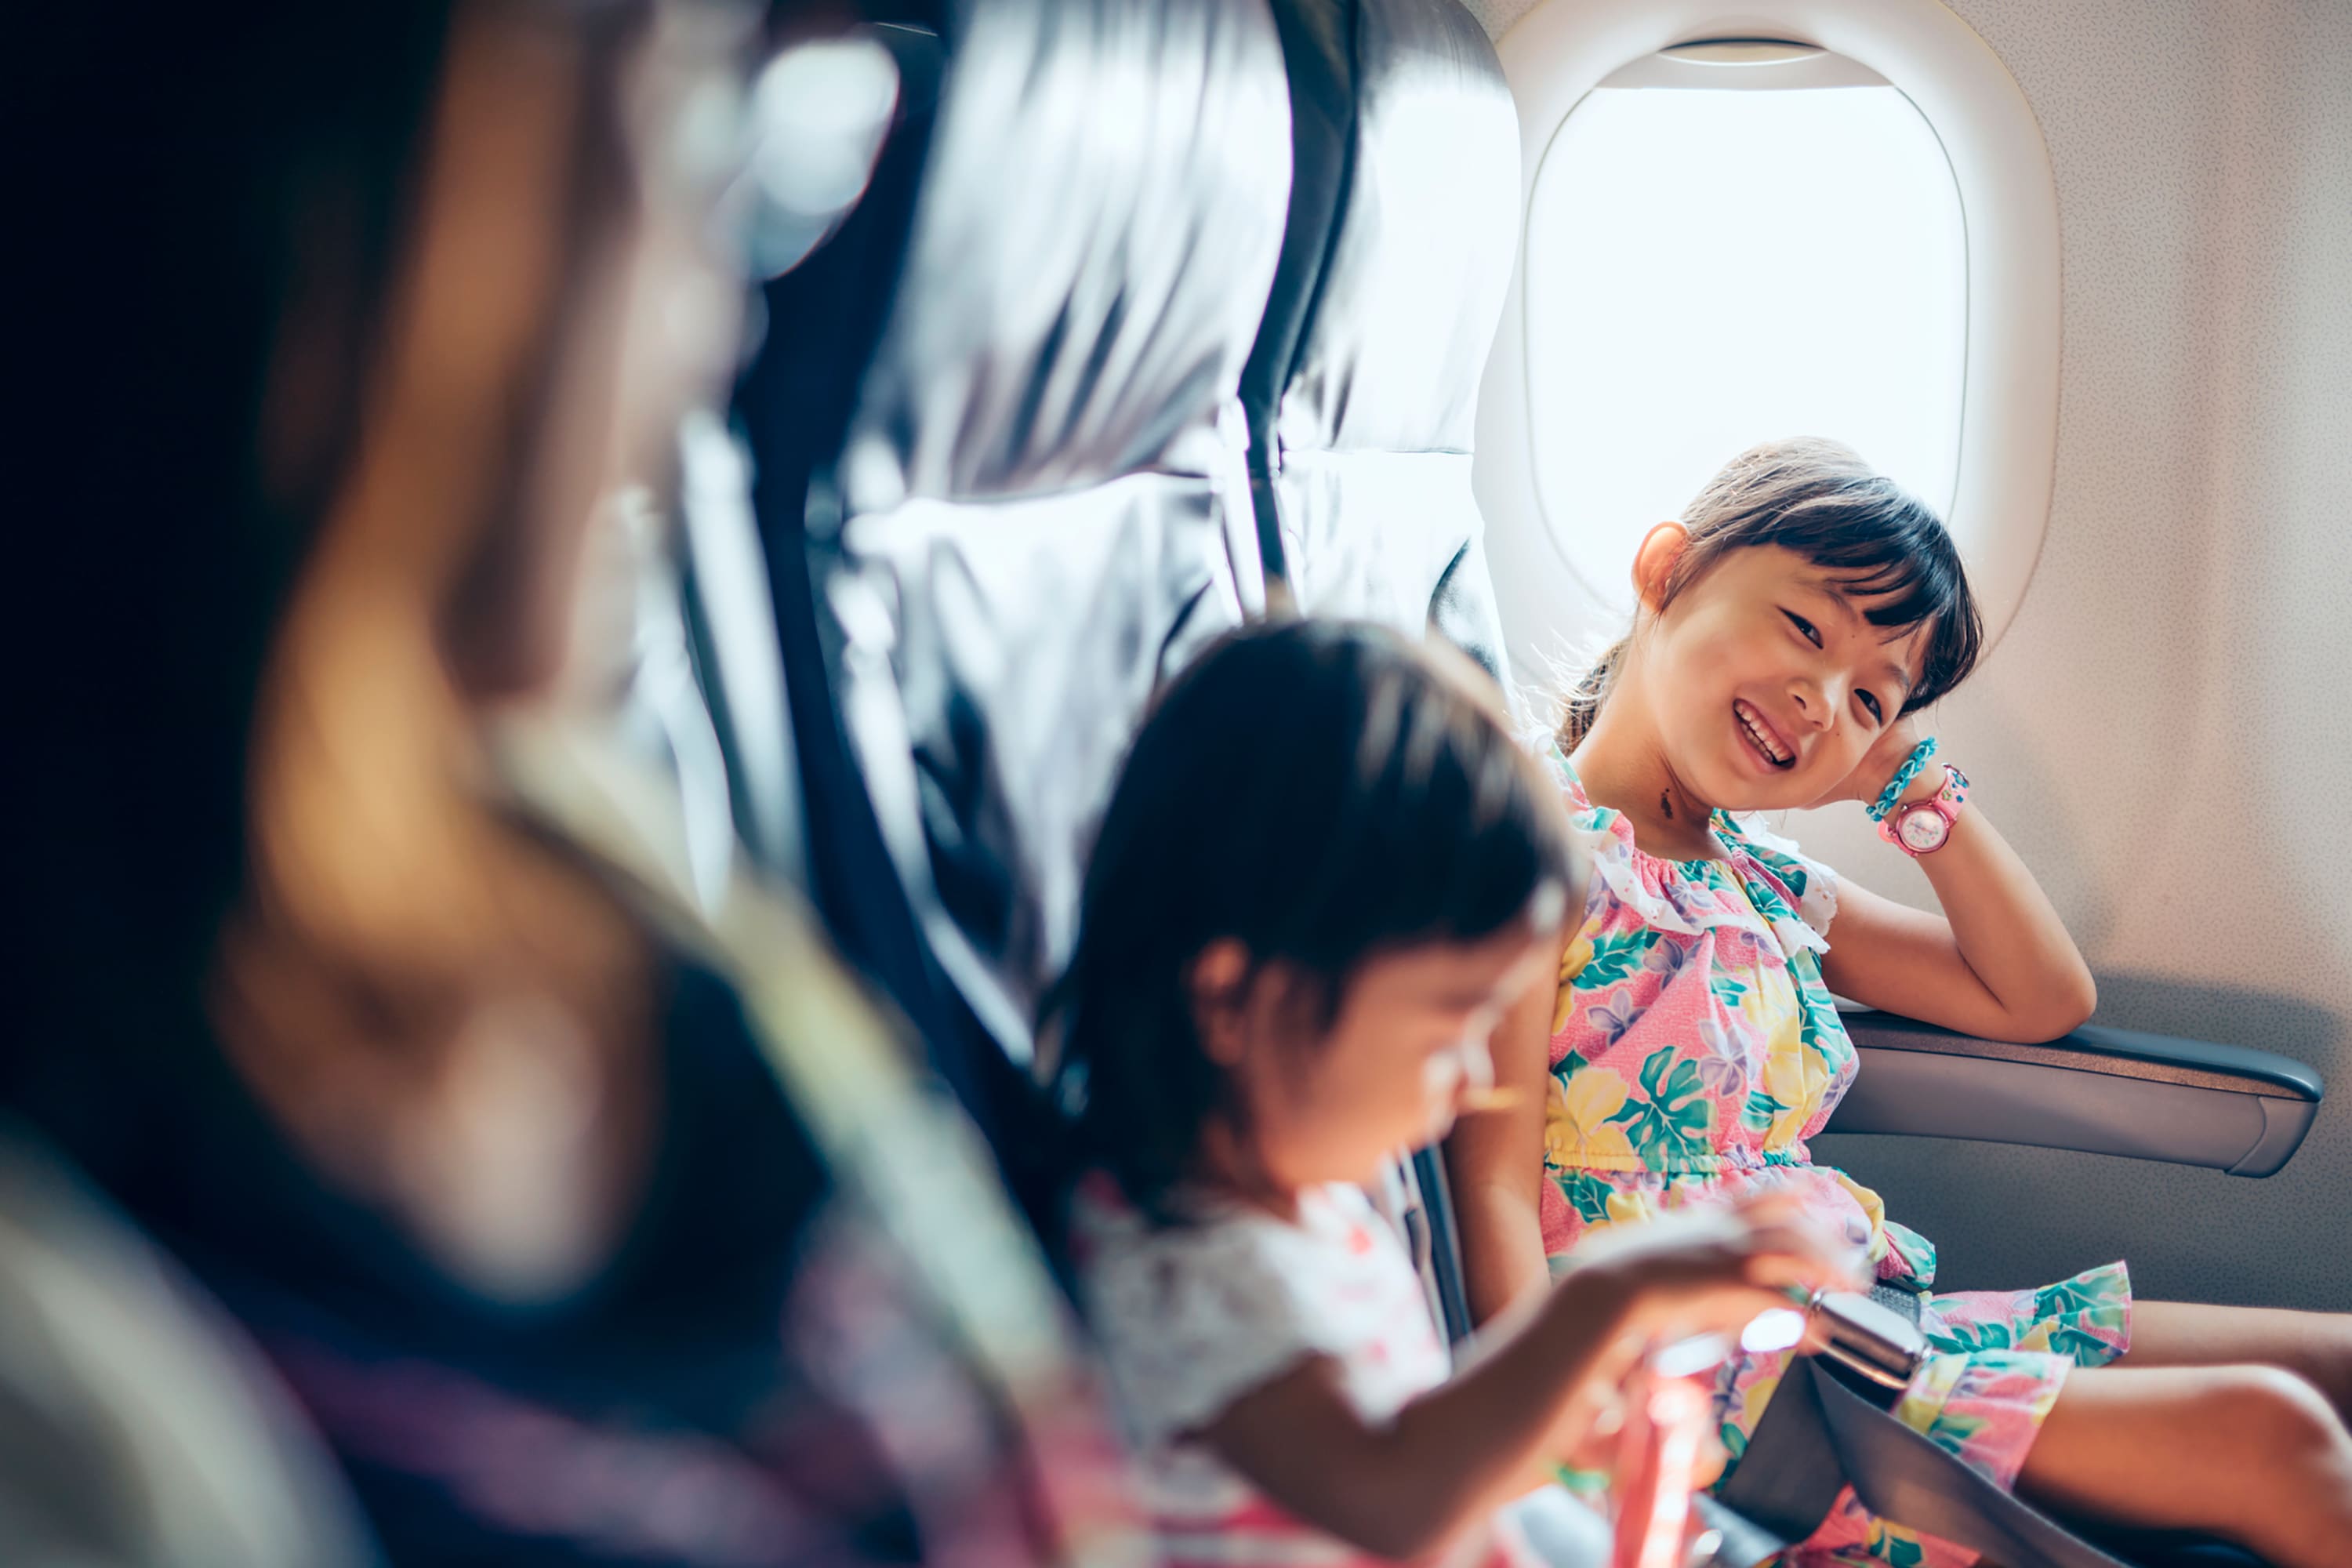 30 Best Family Travel Tips and Hacks You Need to Know